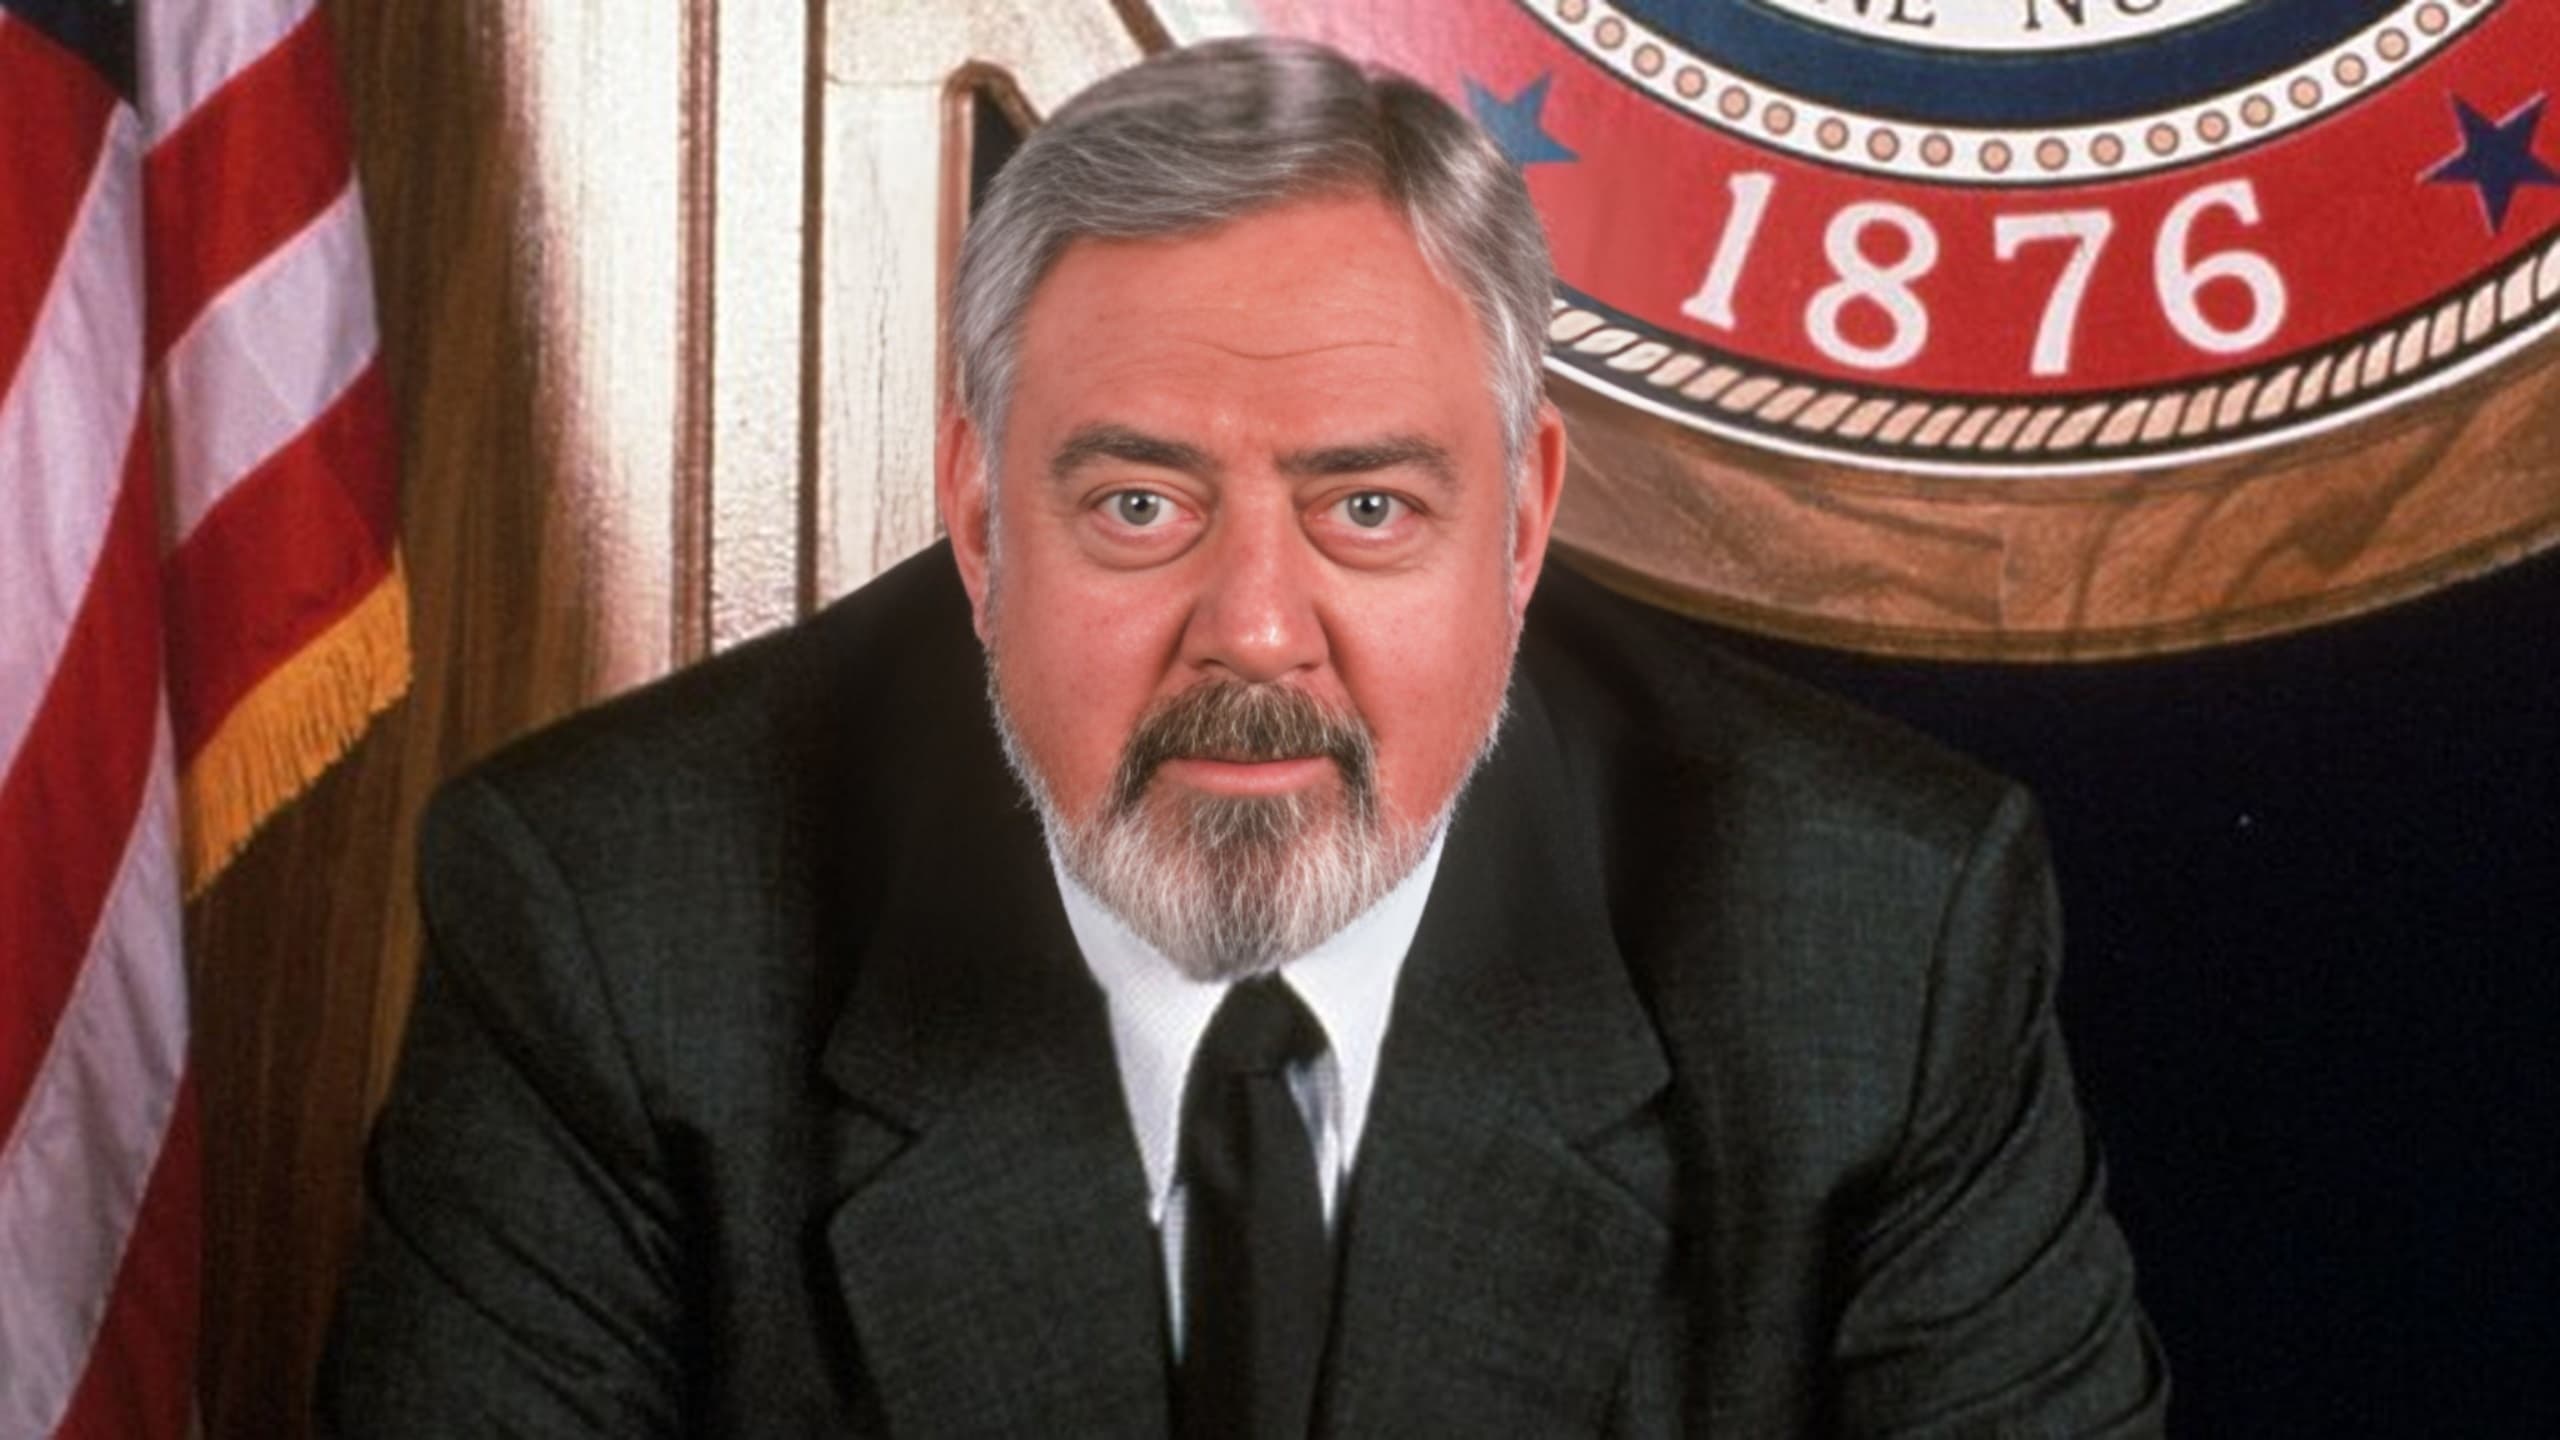 Perry Mason: The Case of the Shooting Star